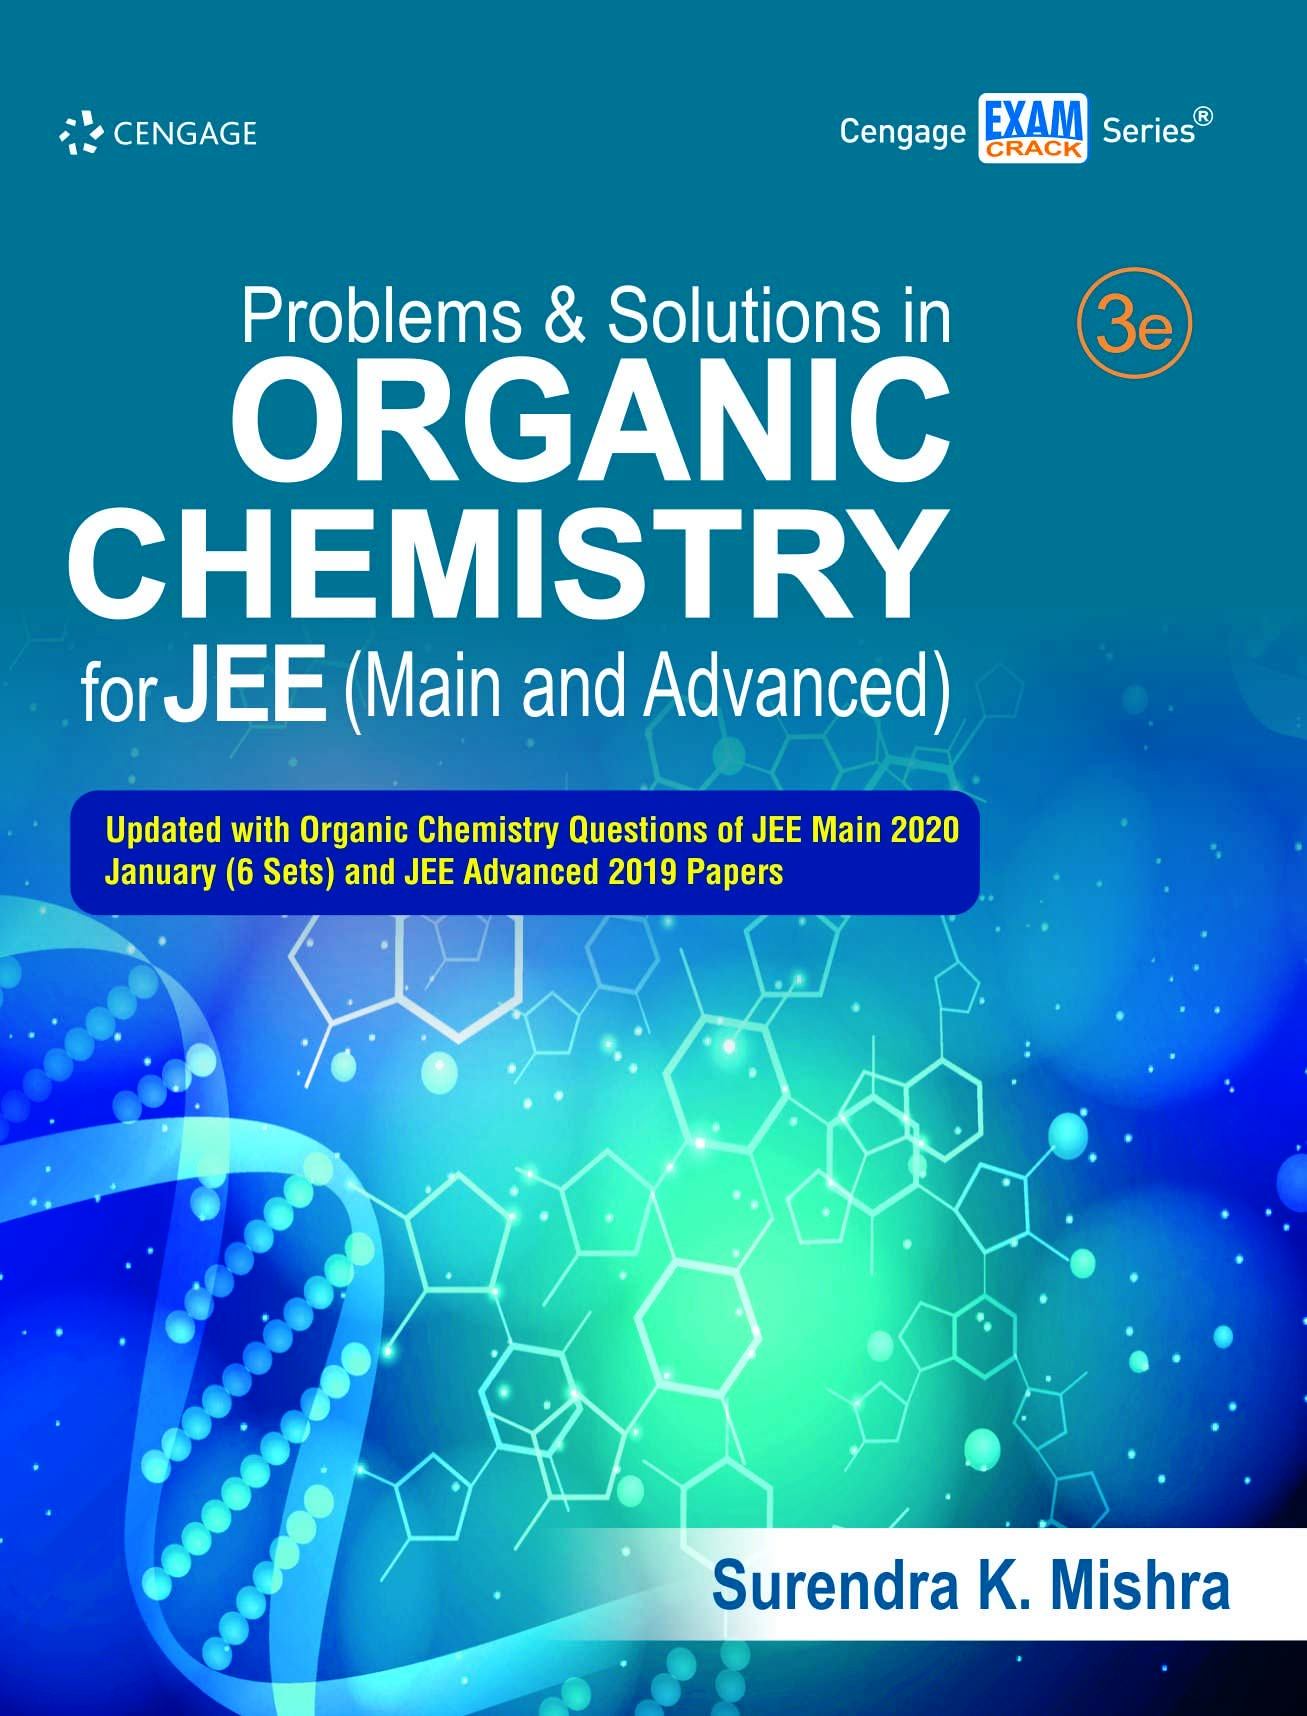 Problems and Solutions in Organic Chemistry for JEE (Main and Advanced)